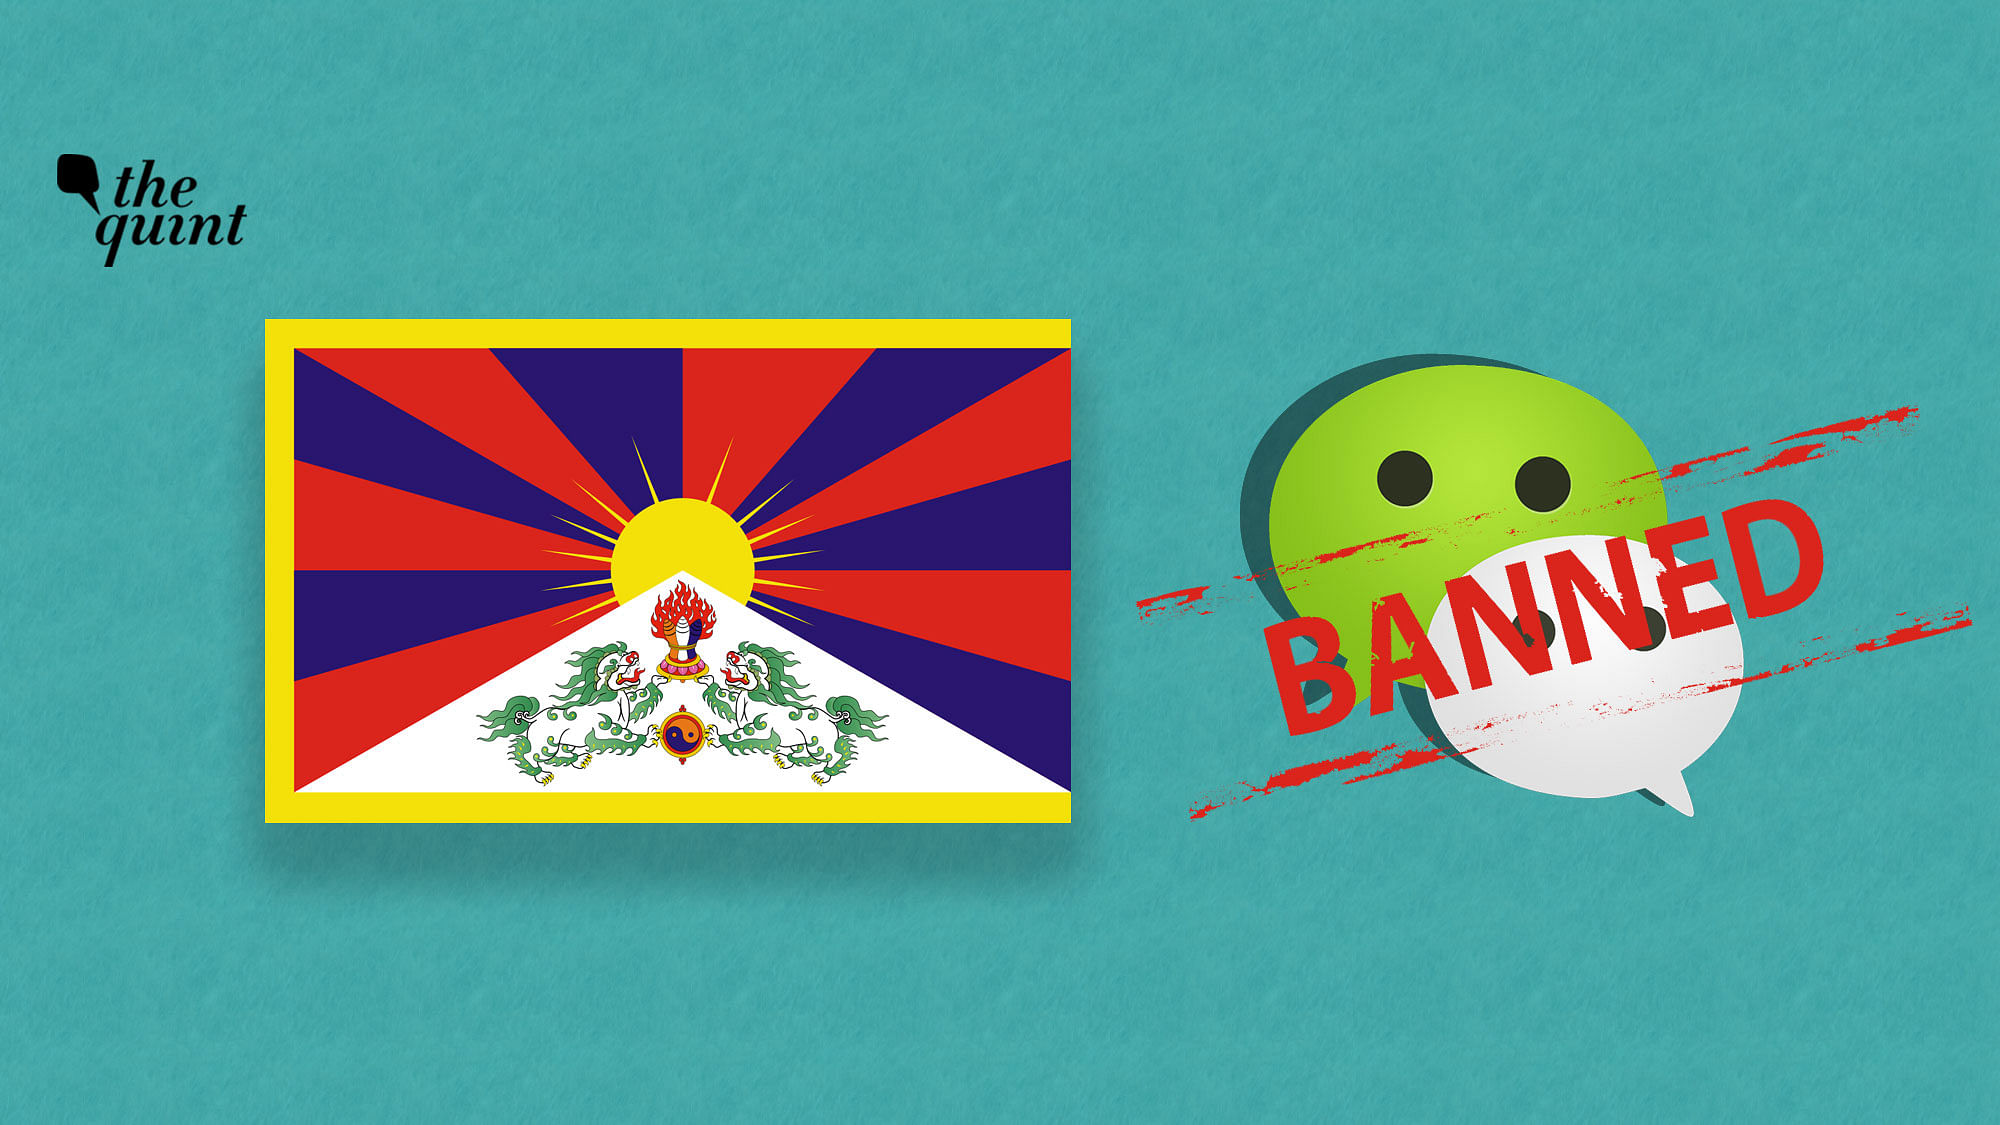 Image of Tibet flag and WeChat logo with a ‘ban’ sign on it, used for representation.